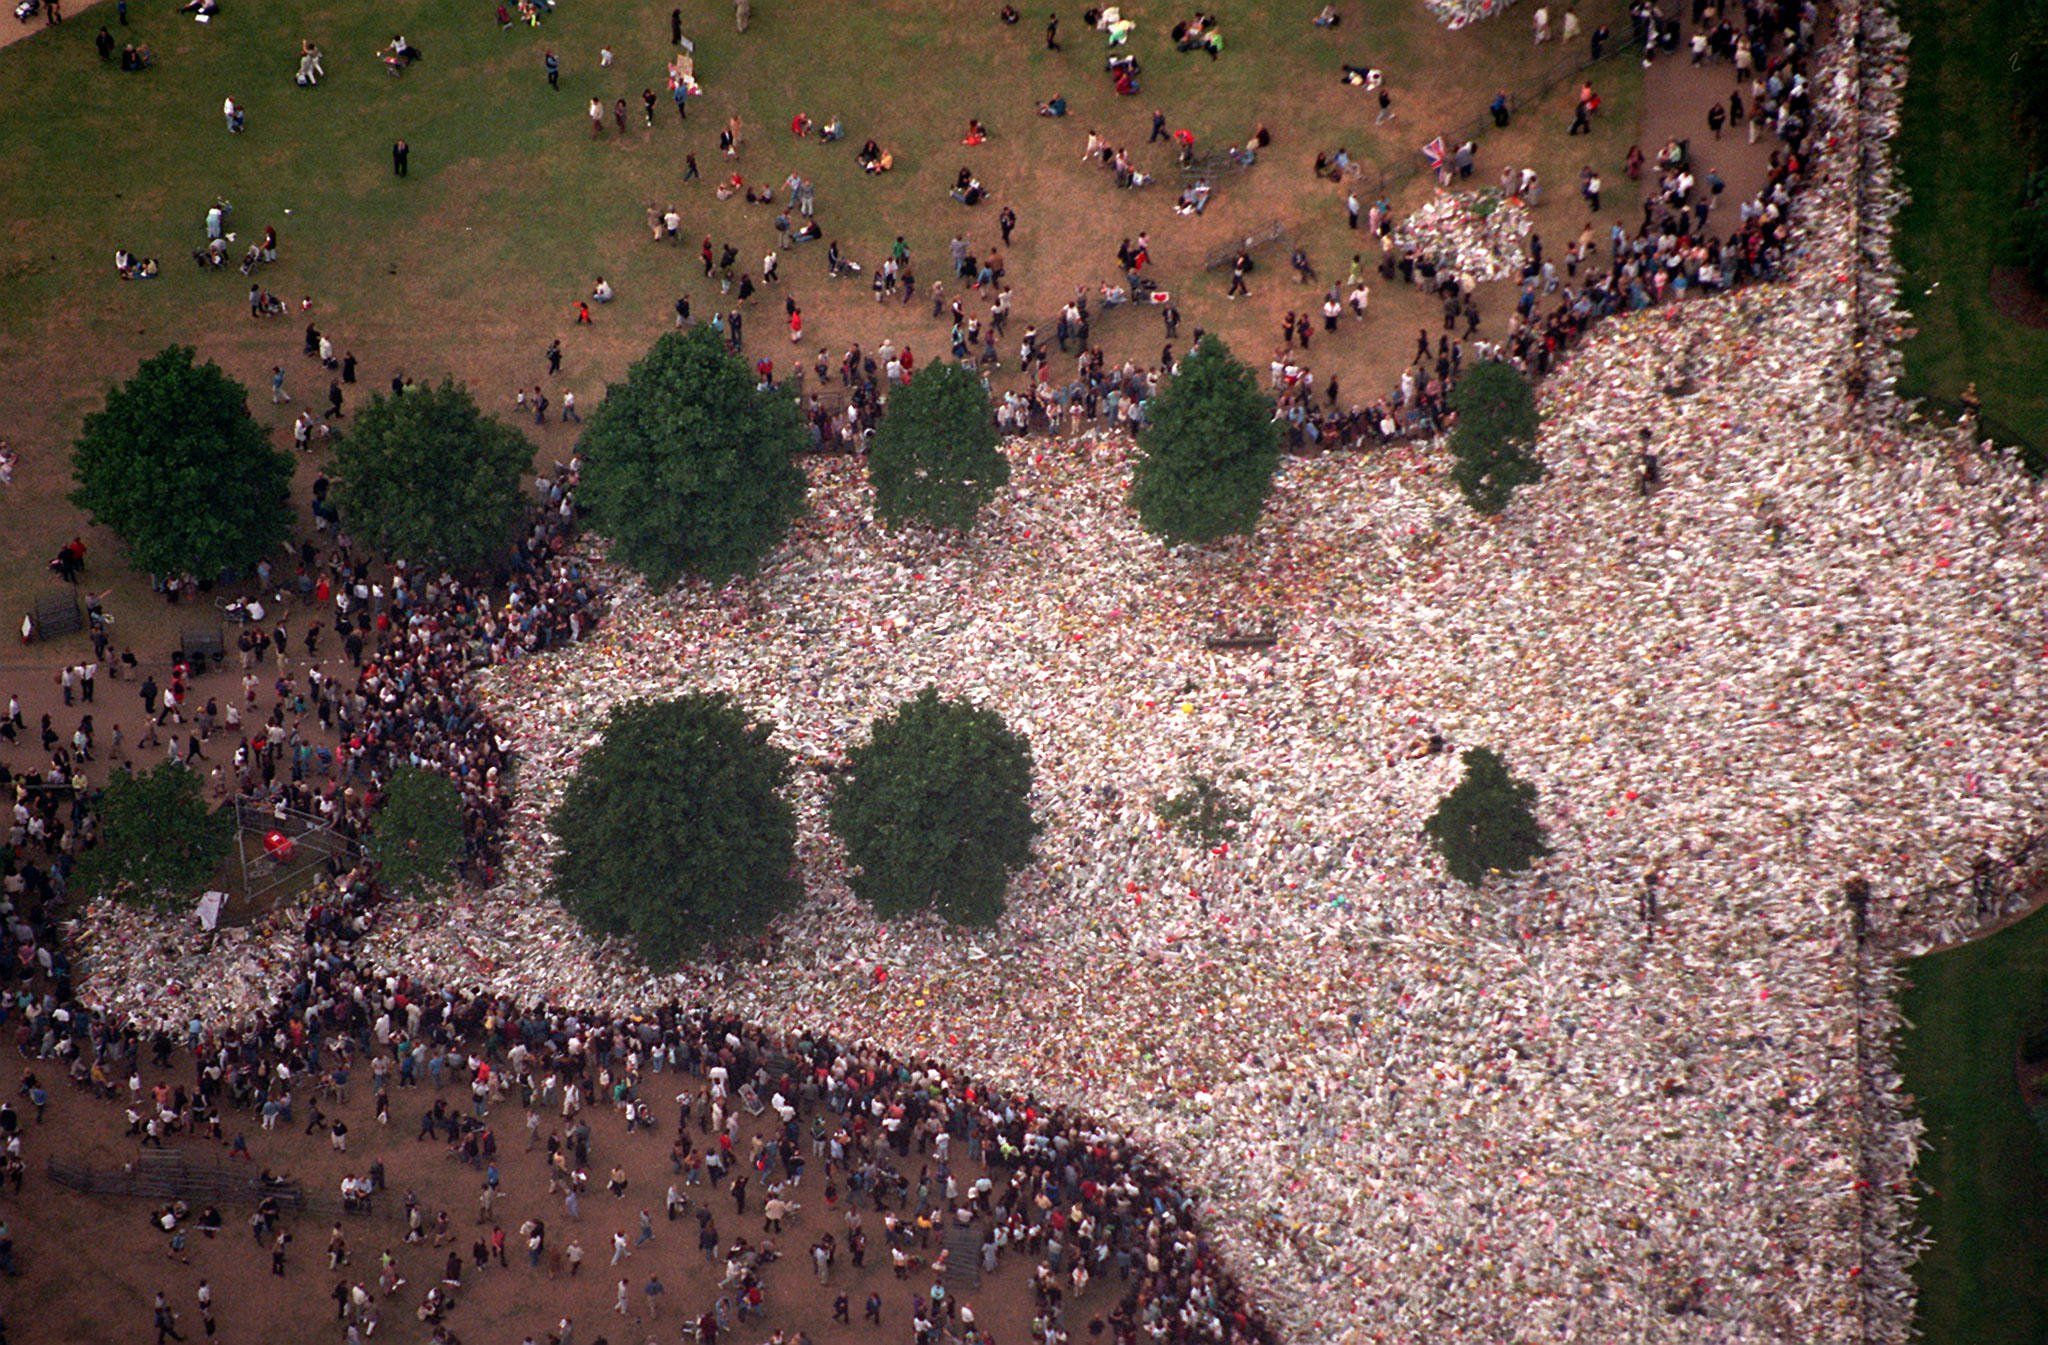 <p>This is an aerial view of the flowers and mementos that mourners left outside the gates of Princess Diana's London home, Kensington Palace, the day before her funeral on Sept. 6, 1997. </p>